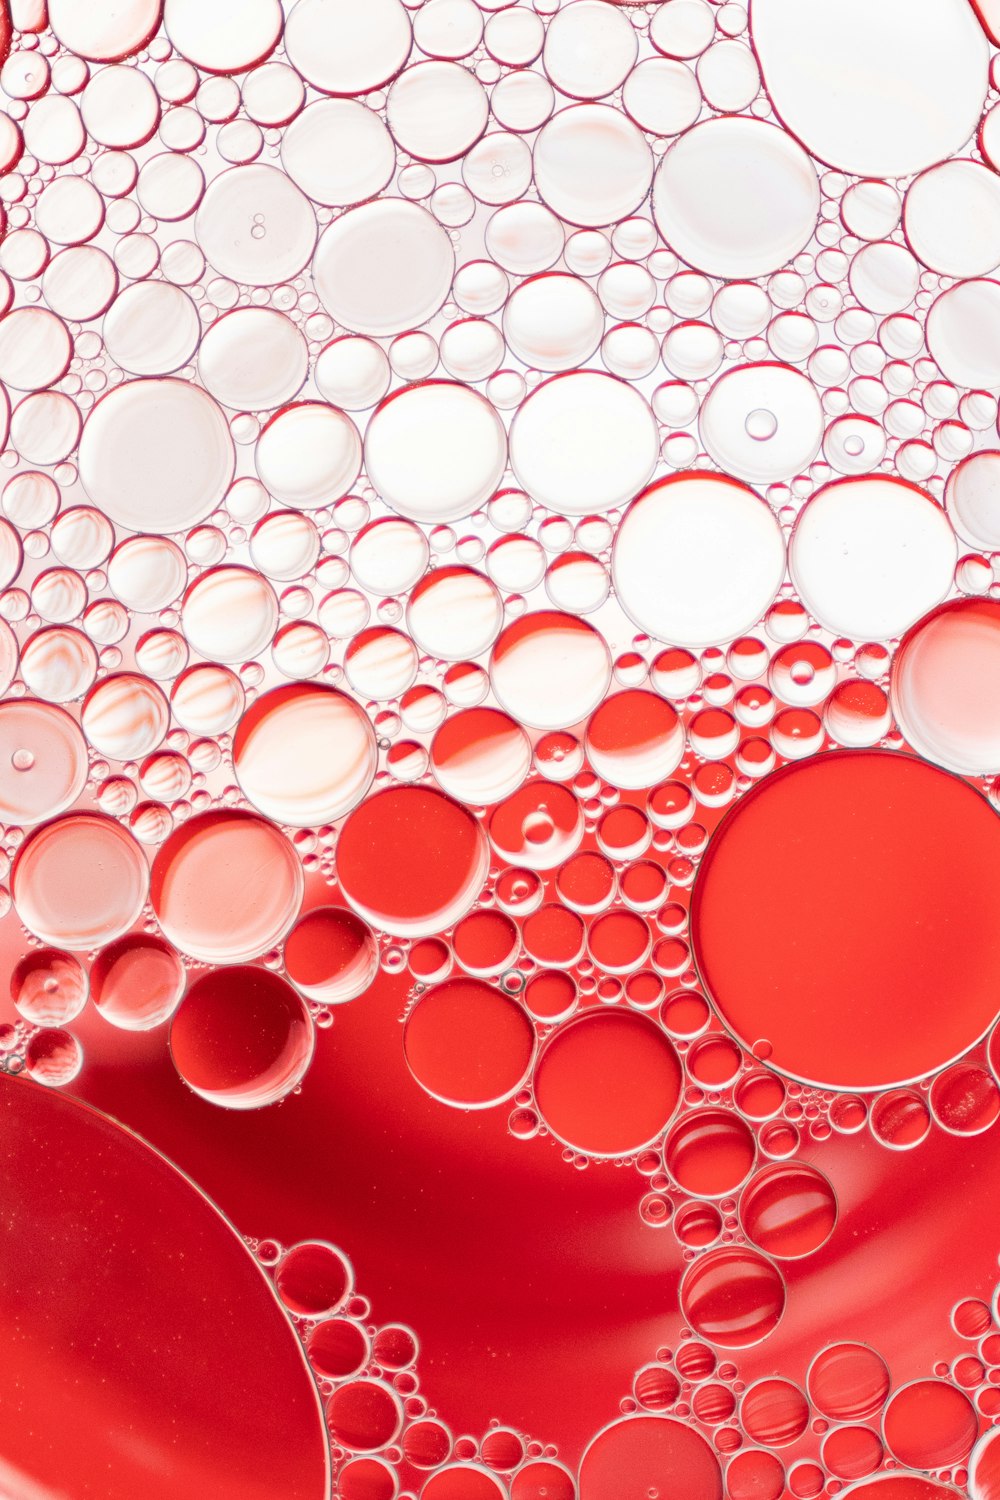 red and white water droplets